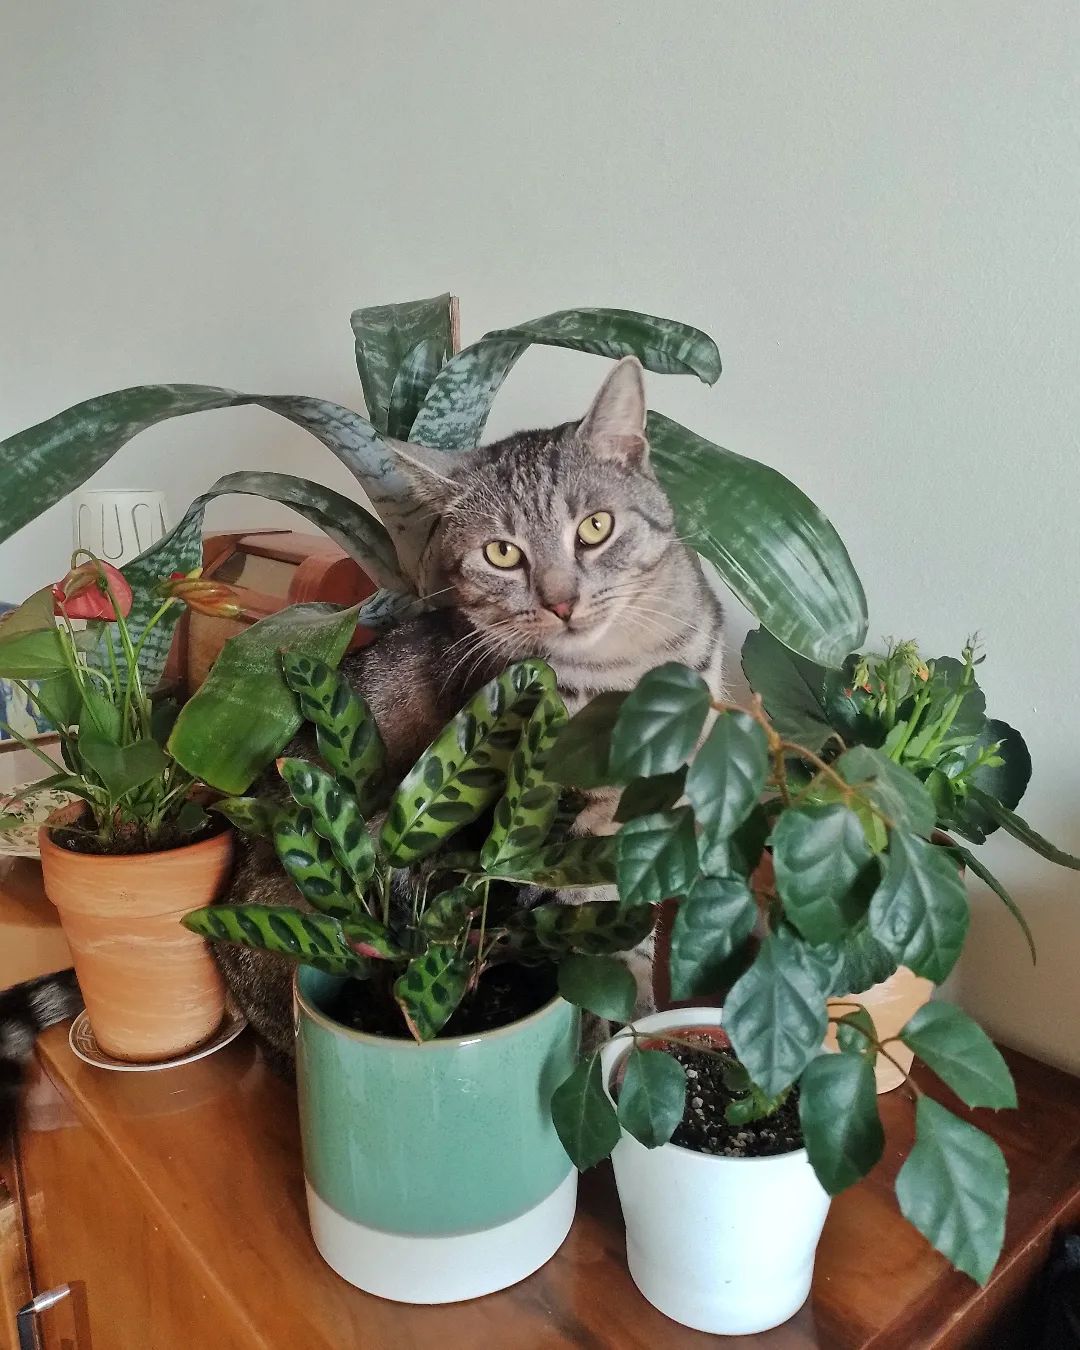 Create A Safe Home With These Pet-Friendly Succulents!